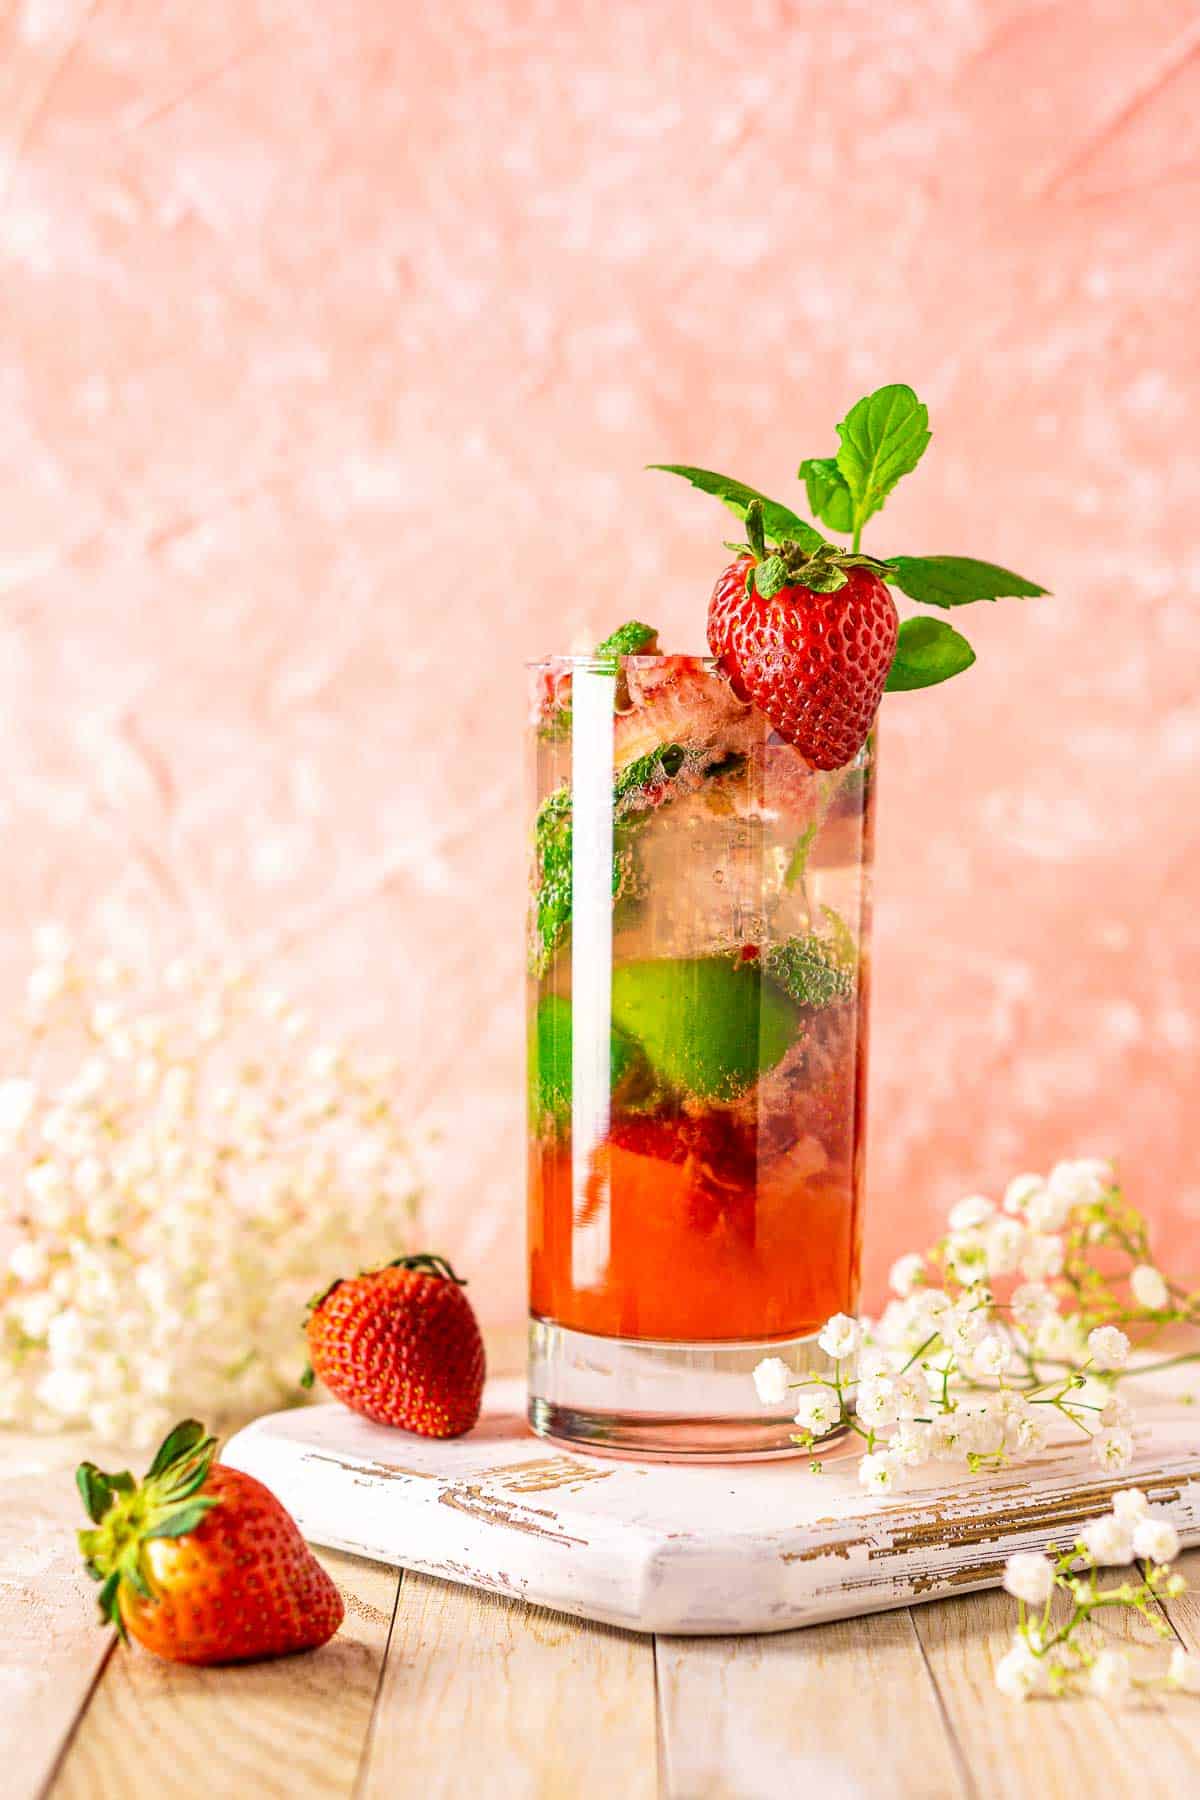 A close-up shot of the strawberry mojito with berries and white flowers around it.